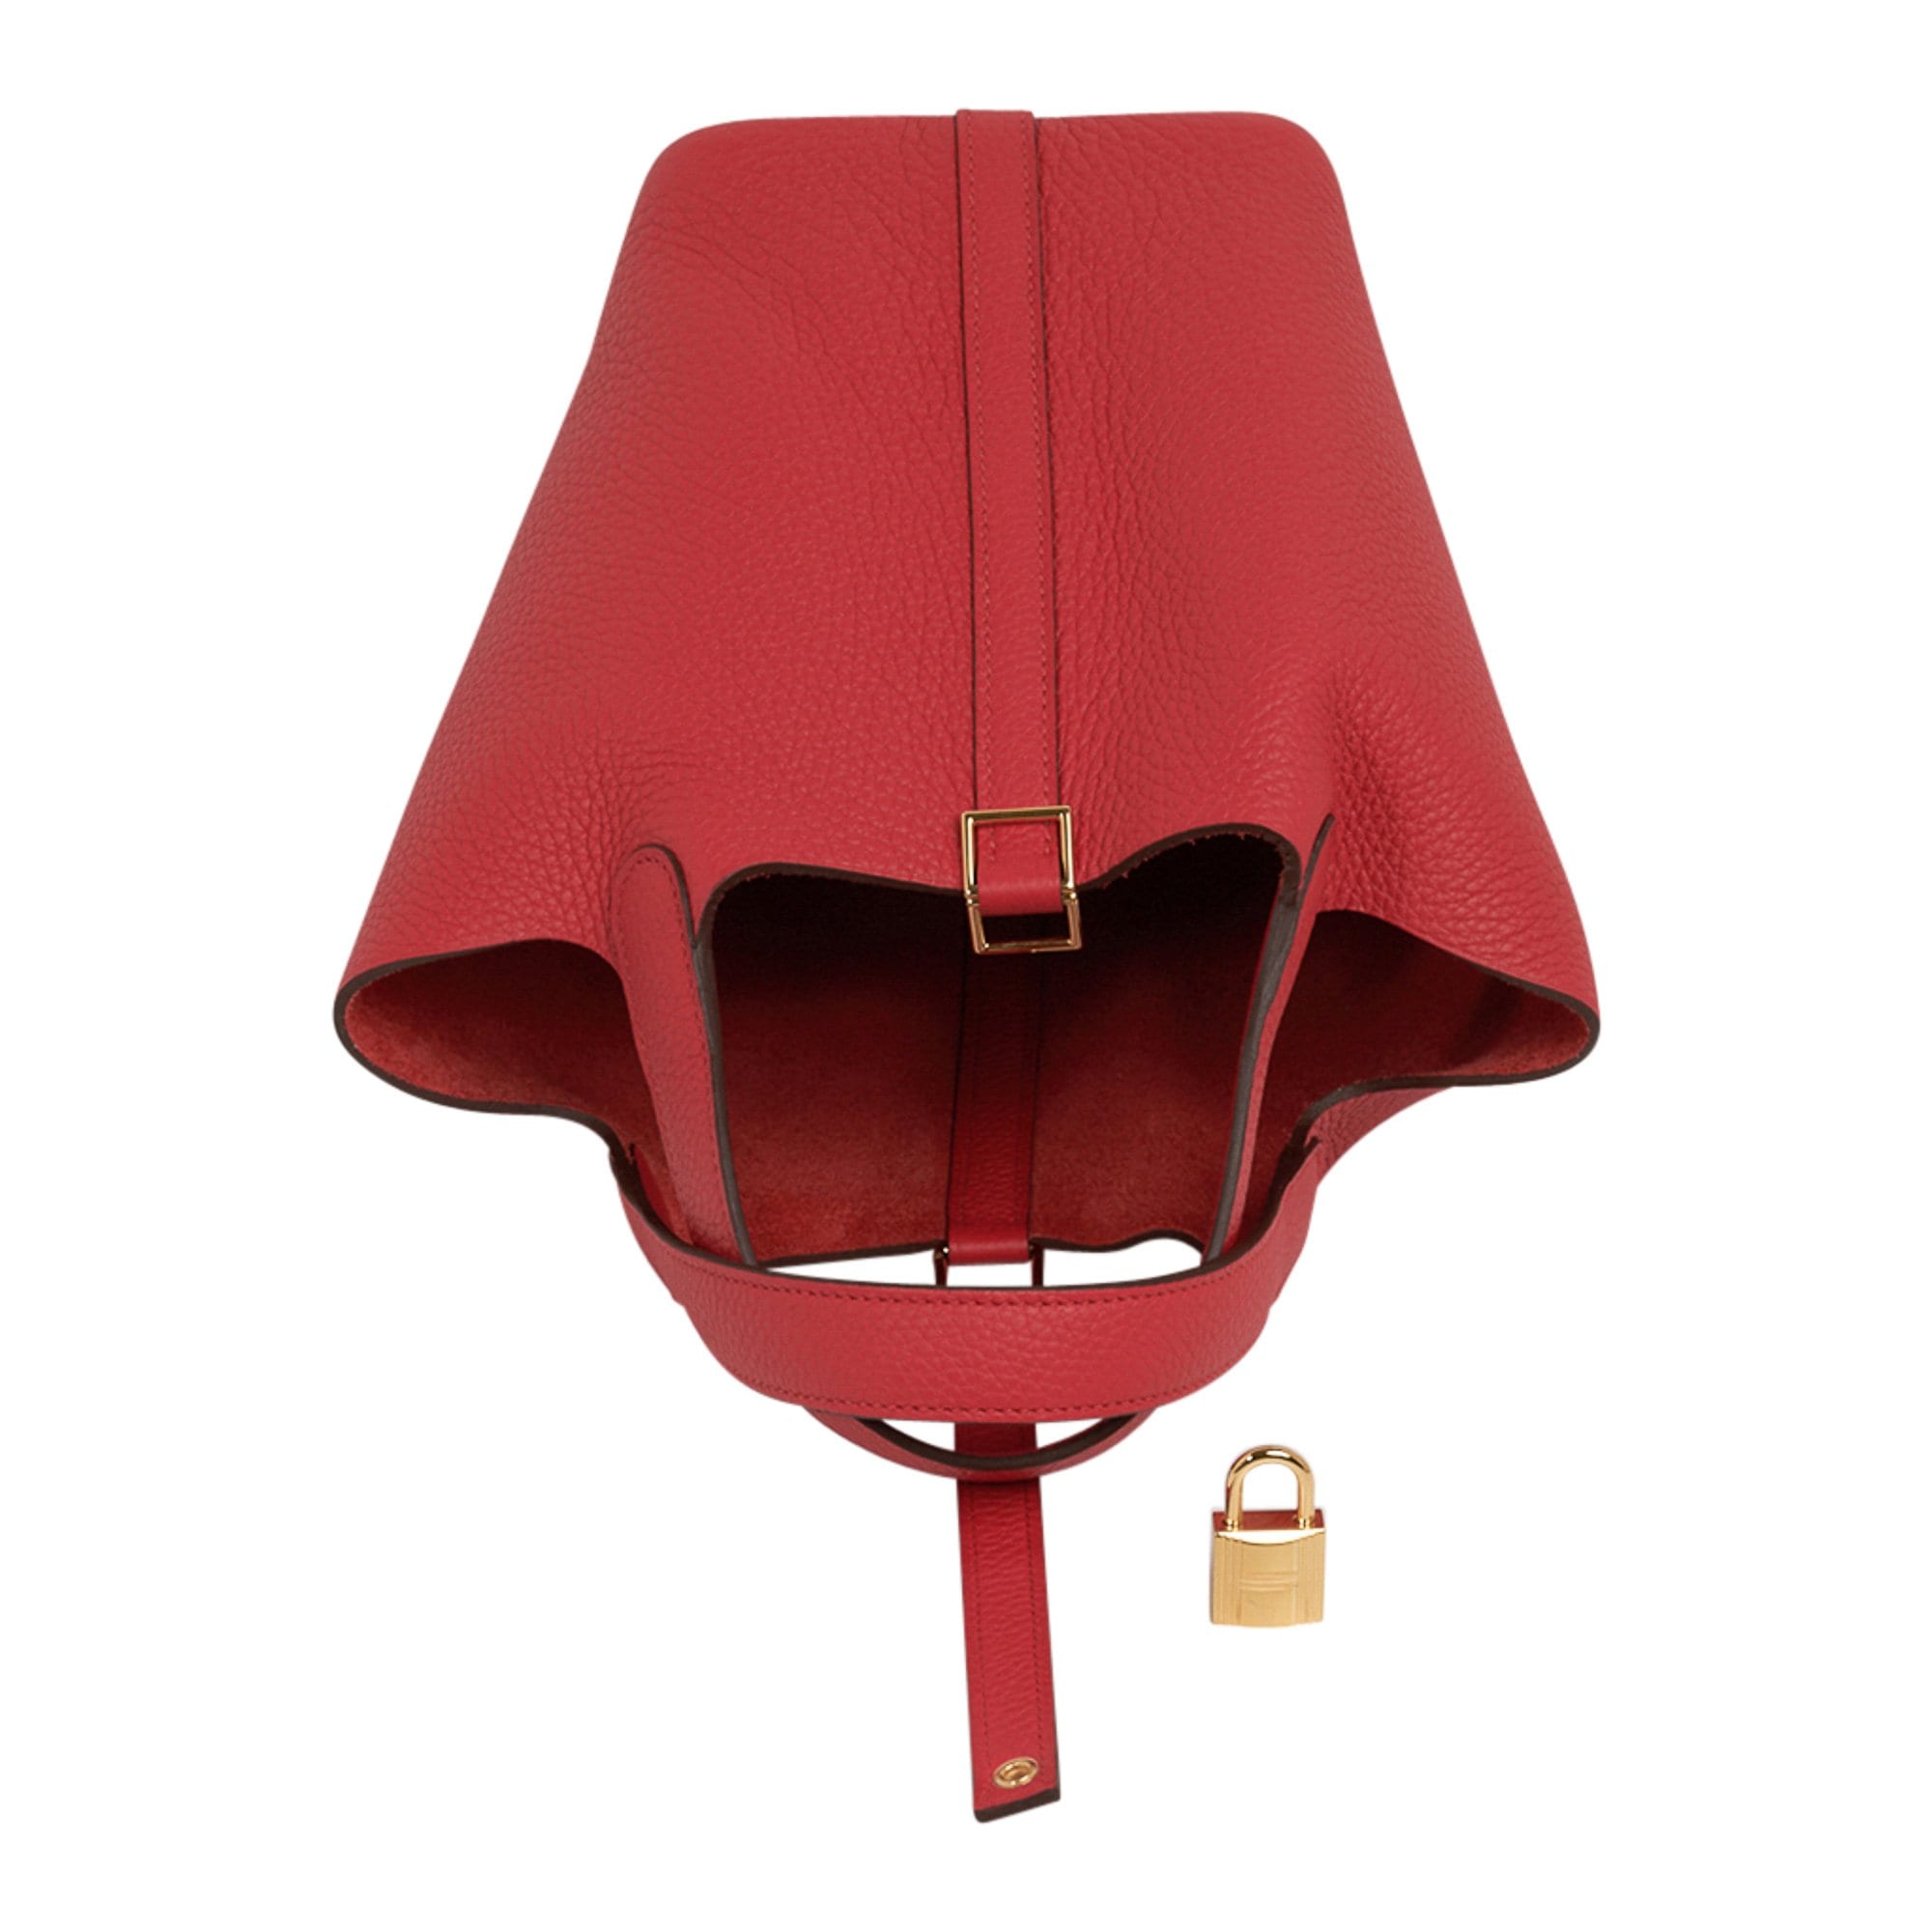 Hermès Picotin Lock 18 Rouge Tomate Taurillon Clemence with Gold Hardware -  Bags - Kabinet Privé